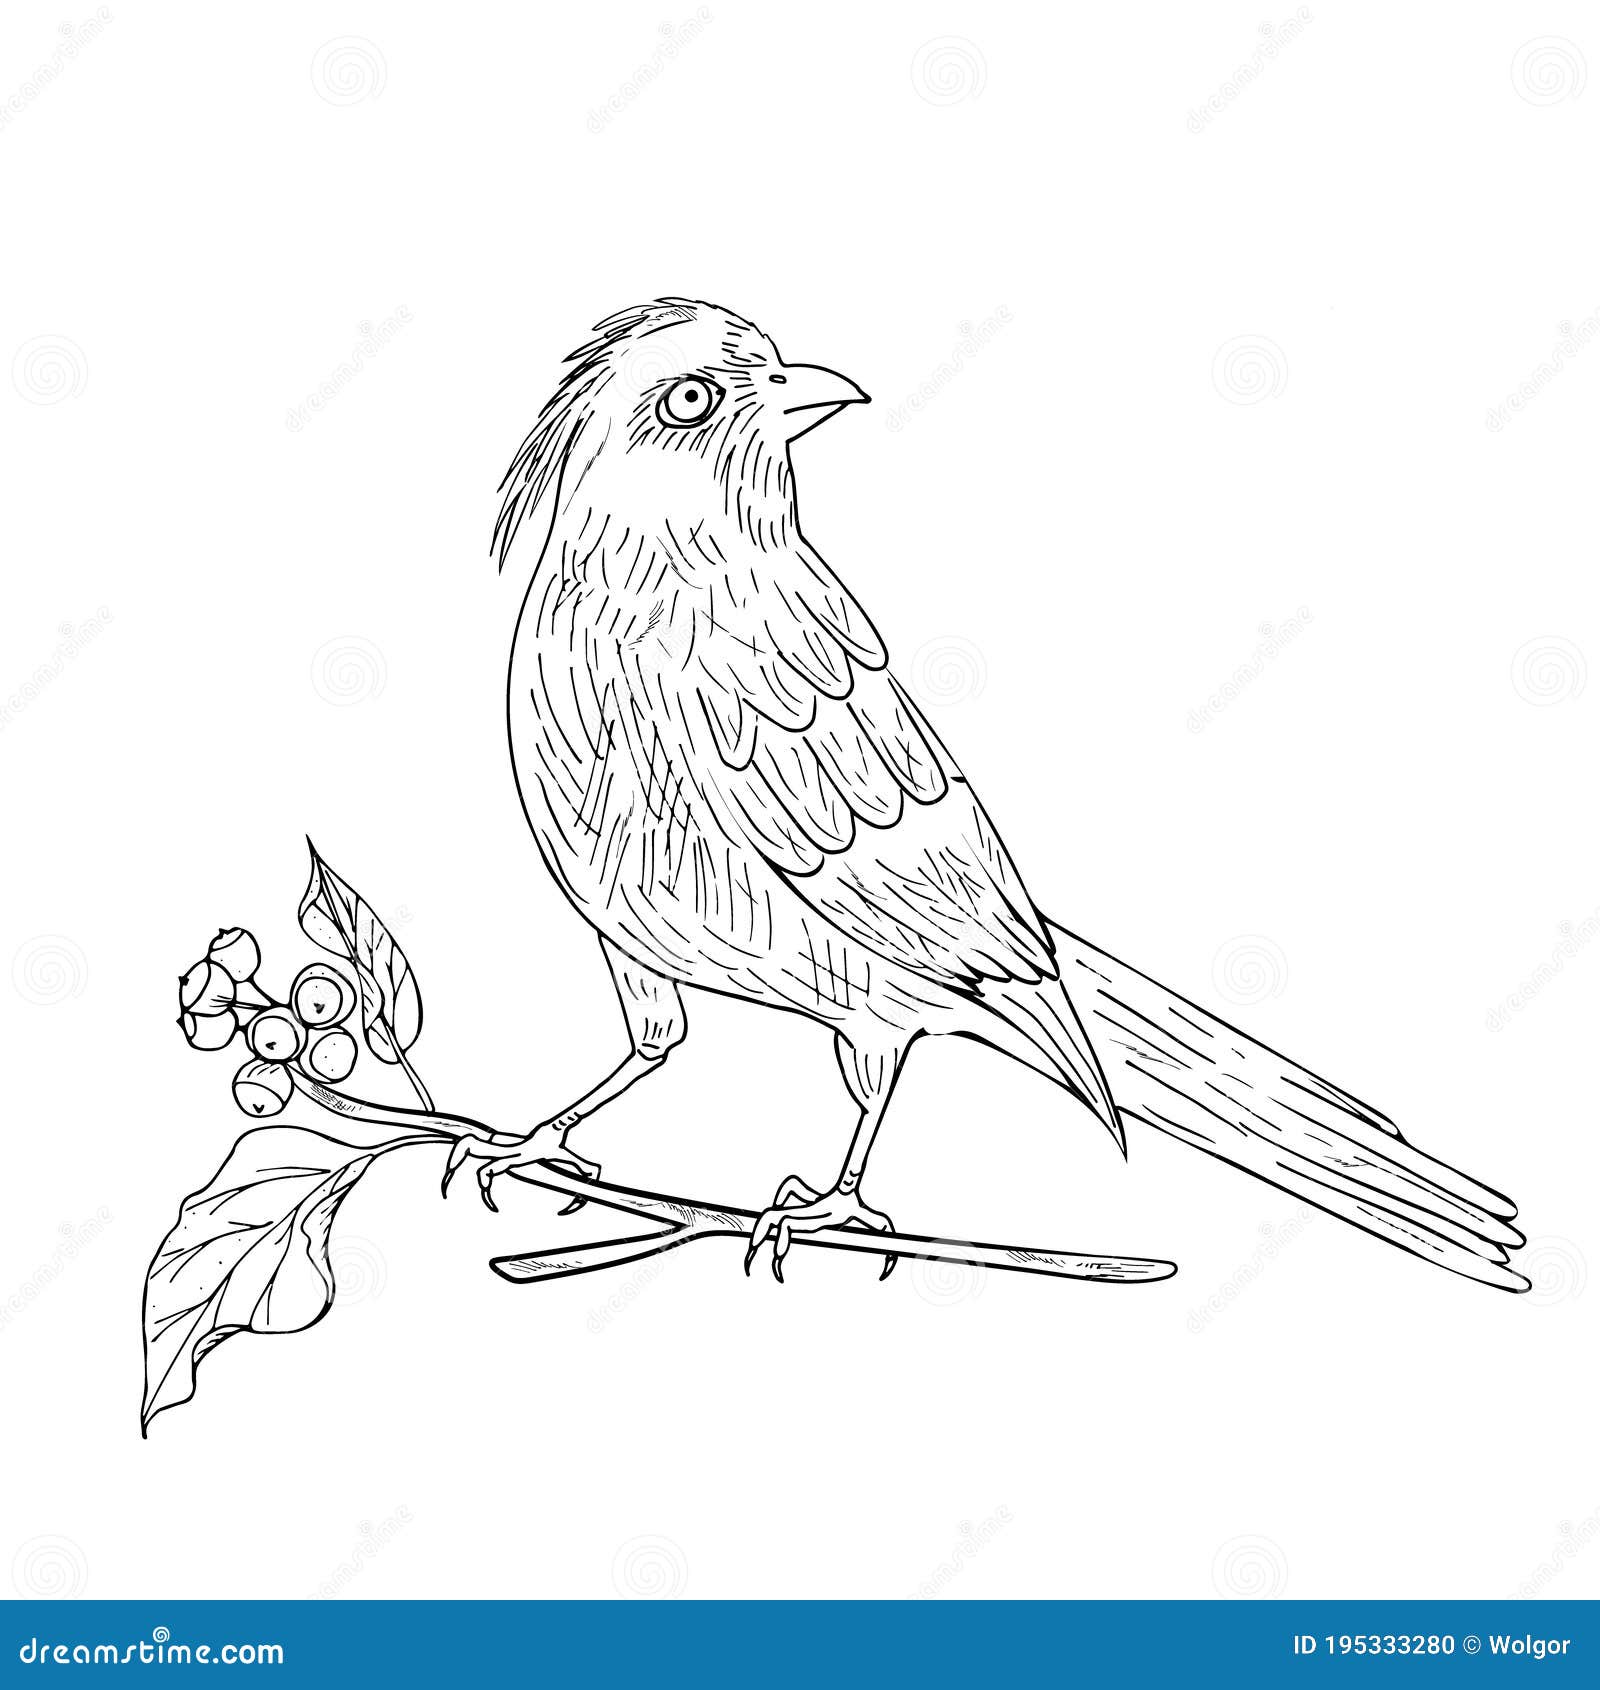 My brother dad and I are getting cardinal tattoos as a remembrance for my  grandfather and our graduation Can someone please photoshop out the branch  and red leaving only the black outline